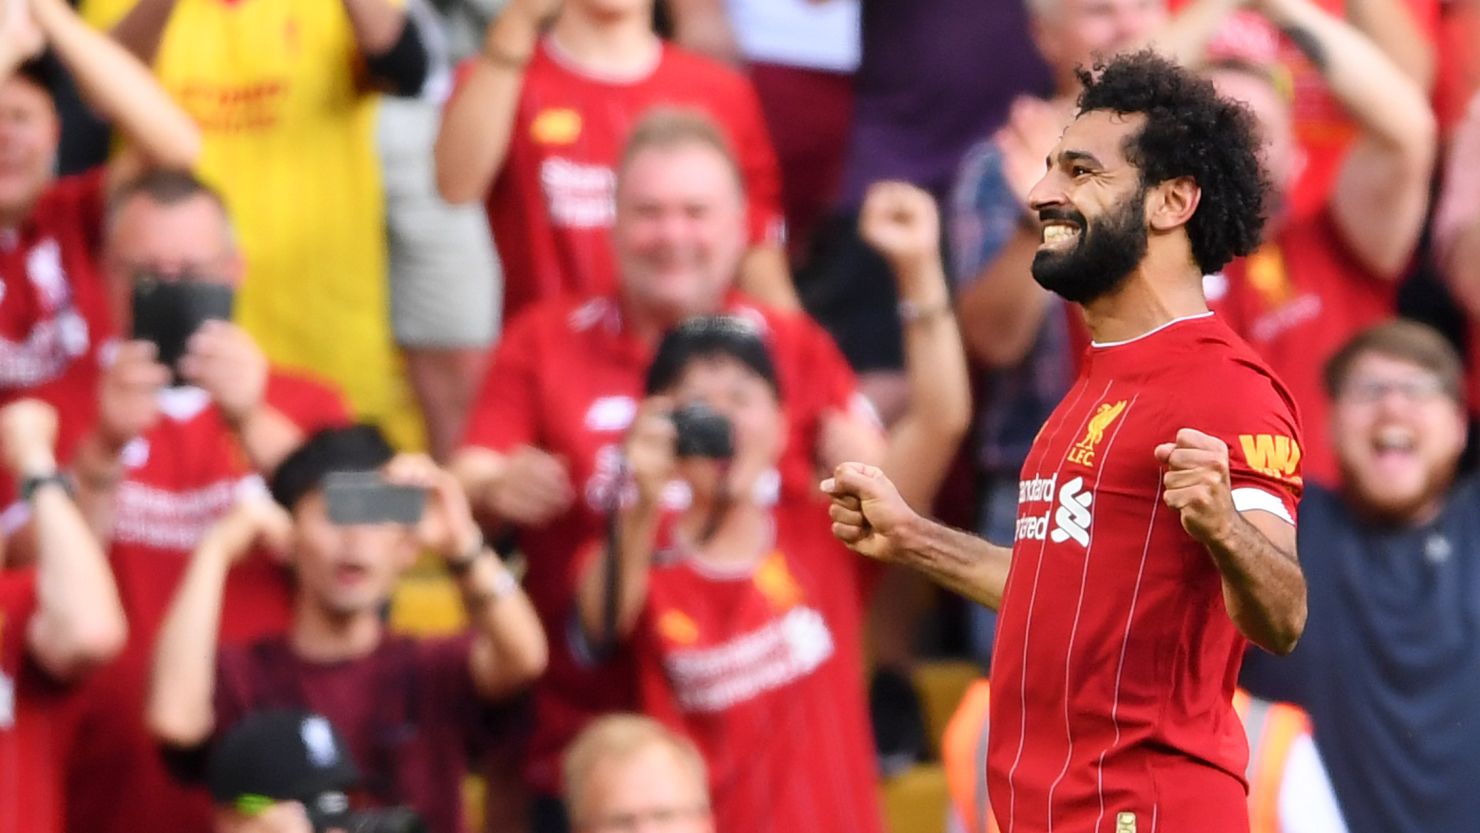 Mohamed Salah scored twice against Arsenal to move Liverpool top of the table